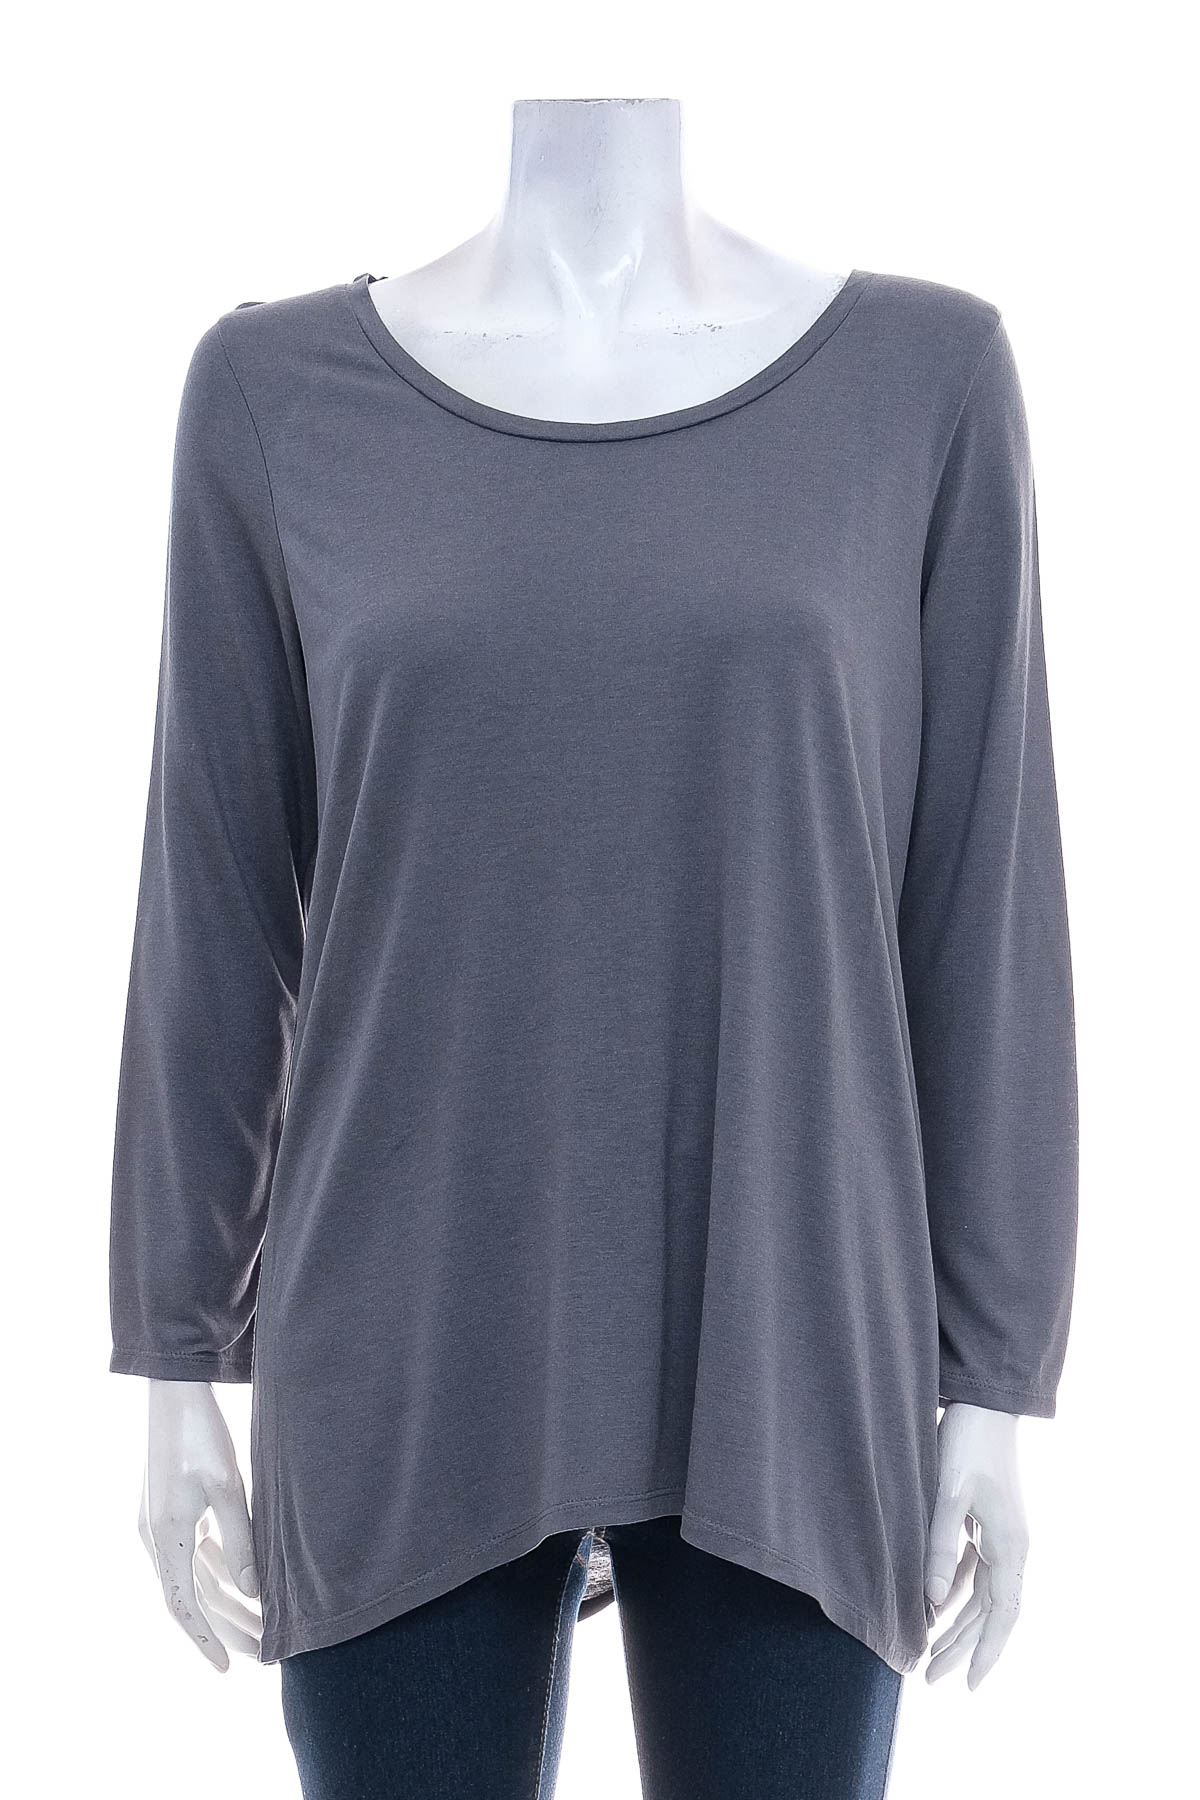 Women's blouse - New Directions - 0